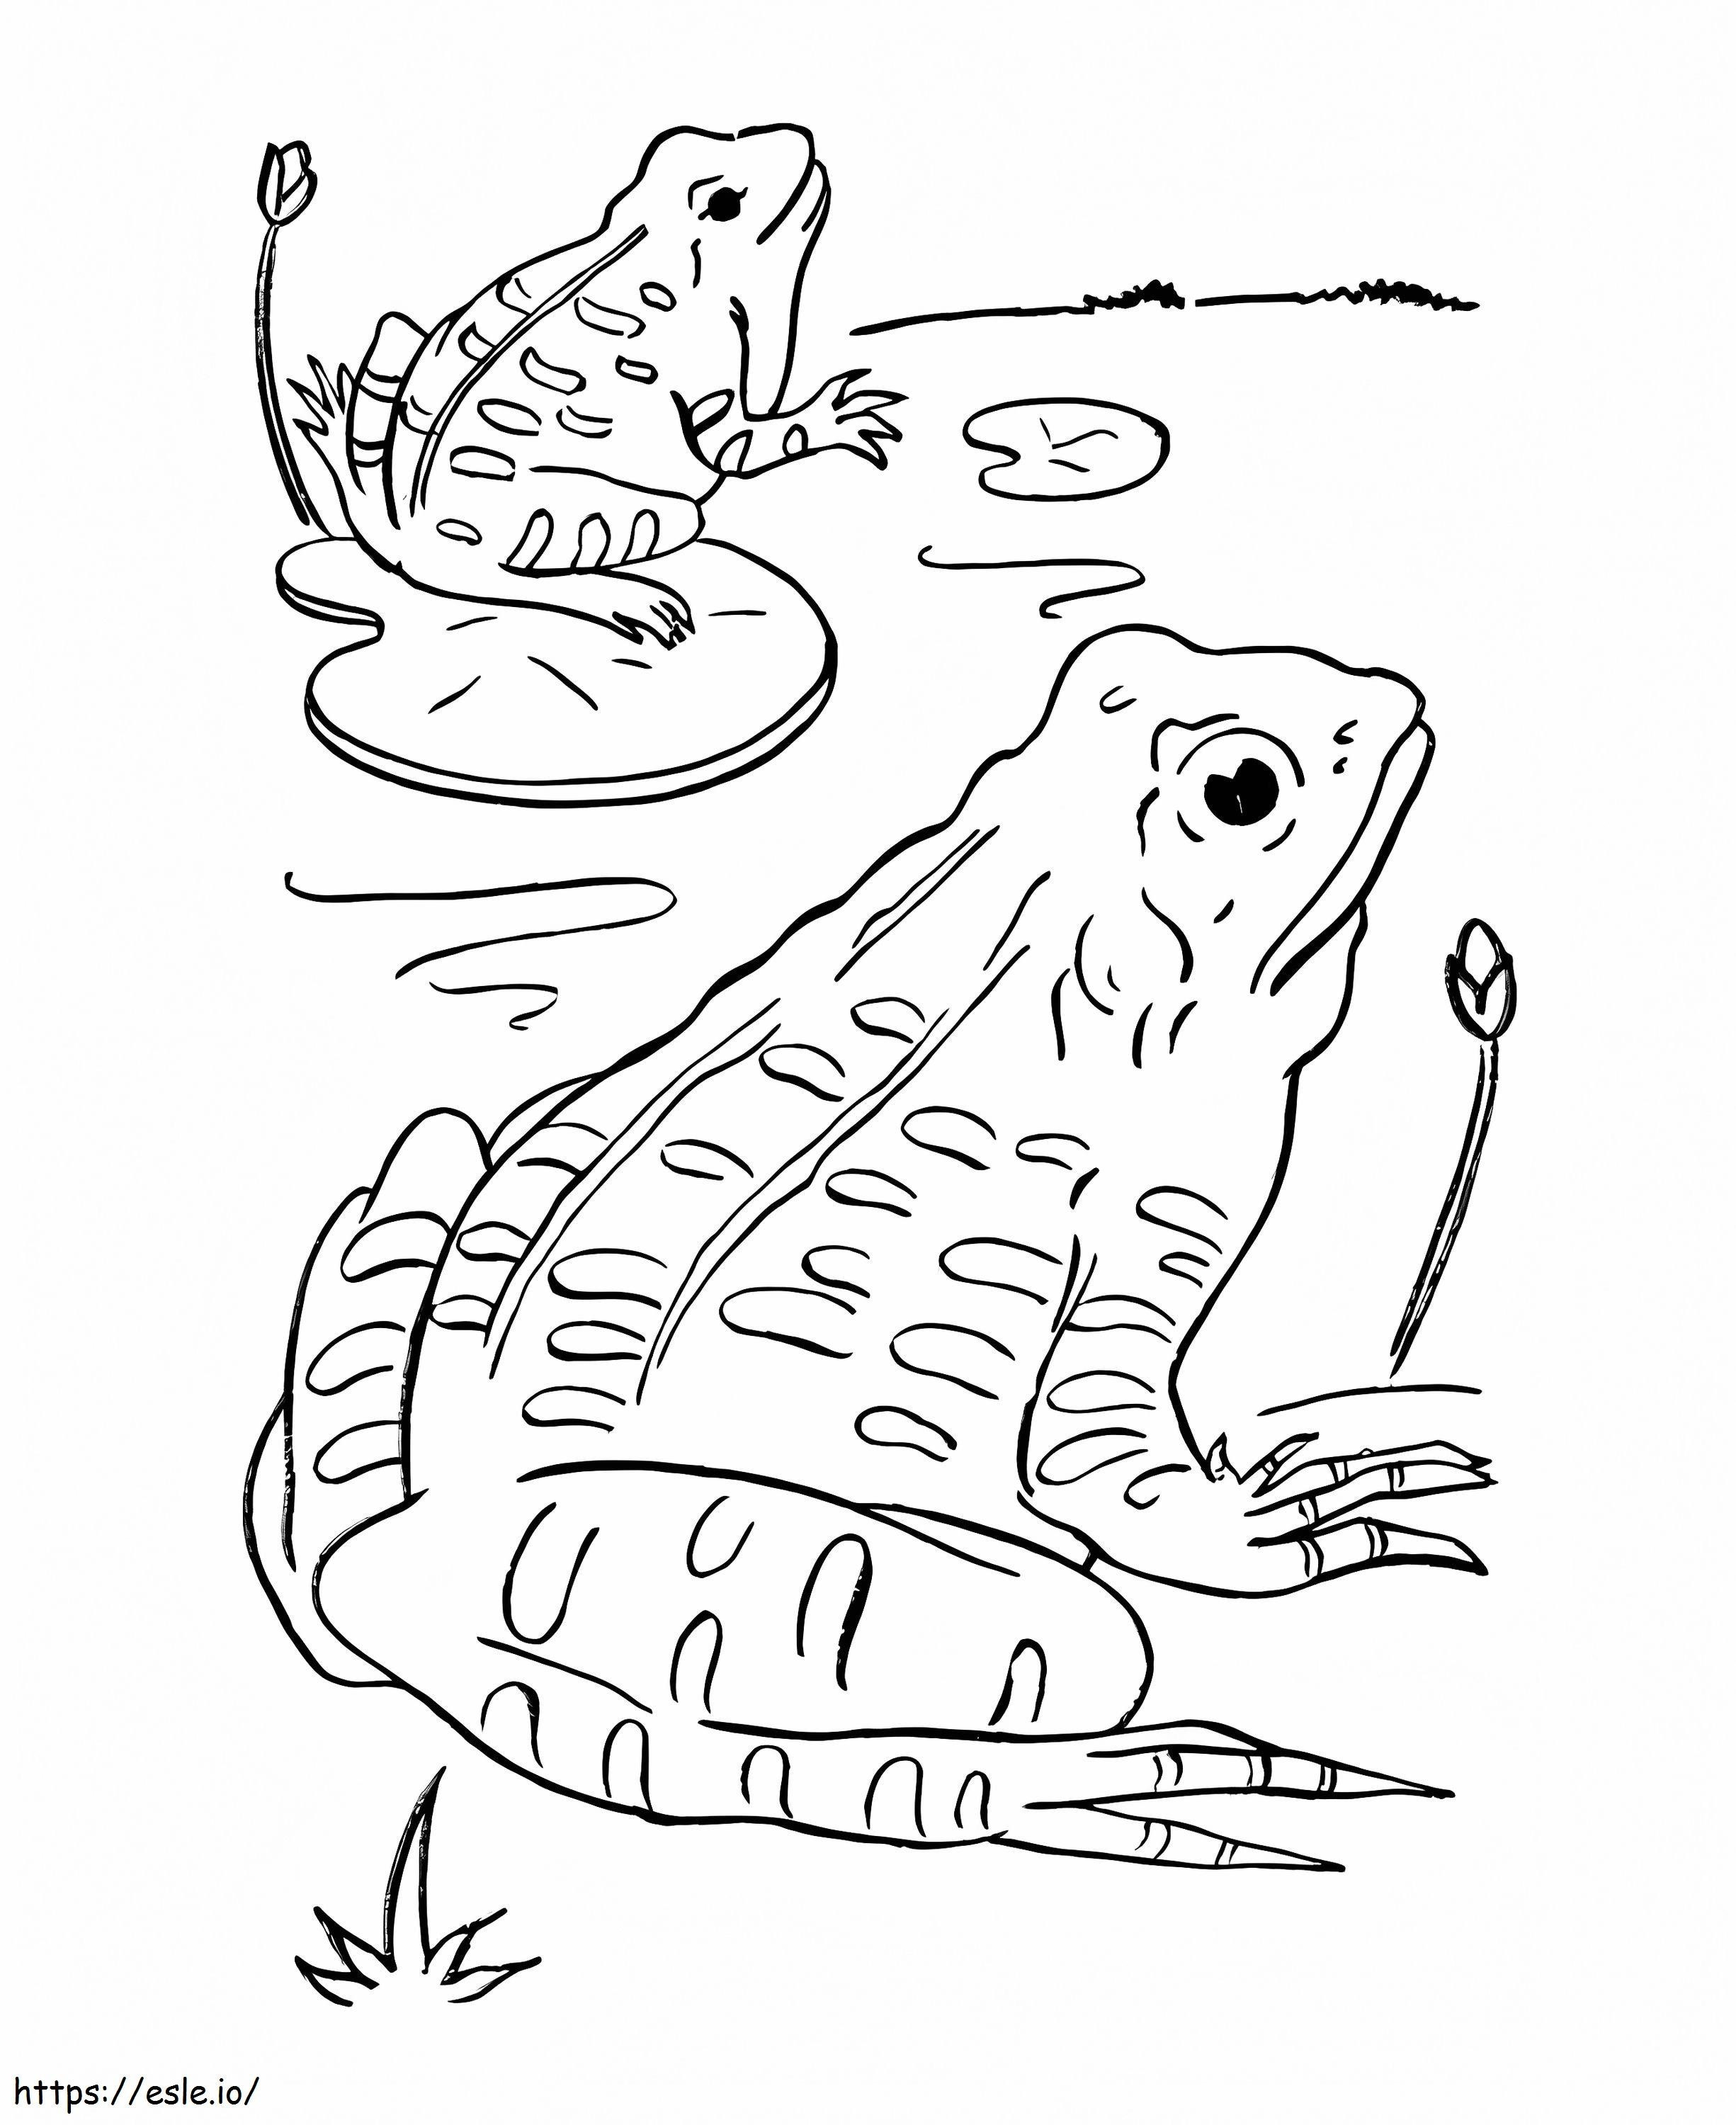 Two Basic Frogs coloring page